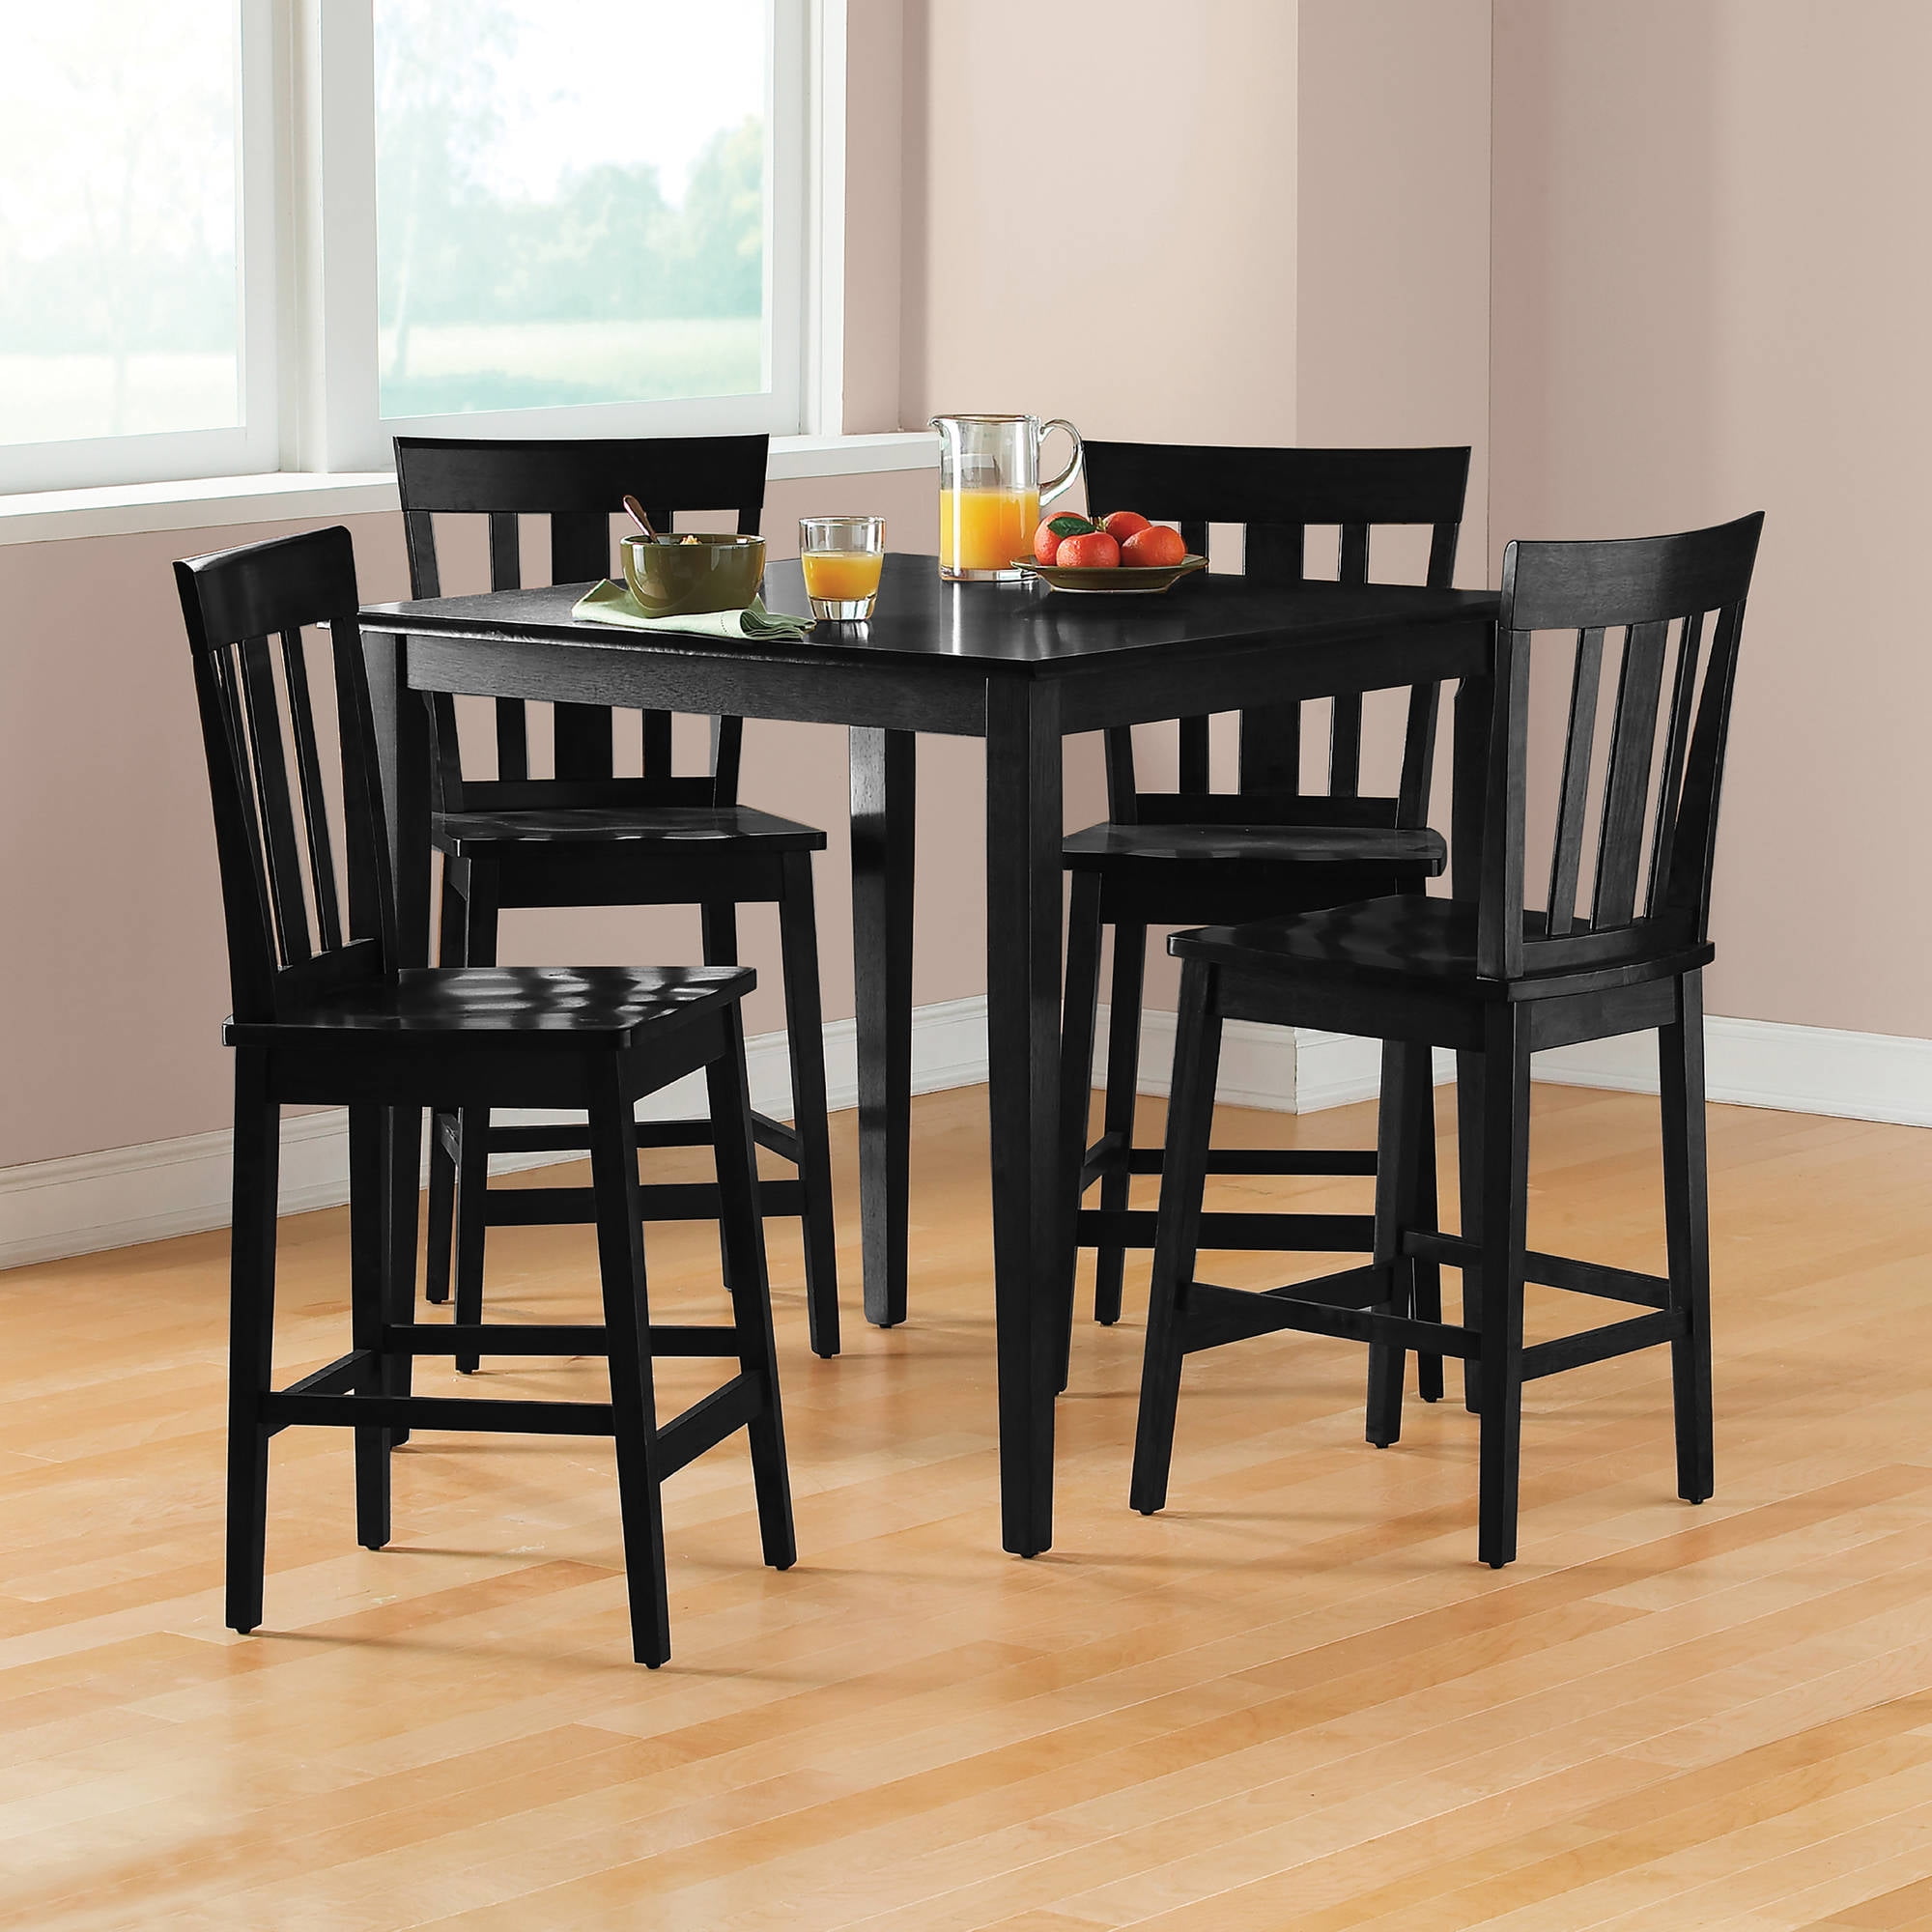 Mainstays 5 Piece Mission Style Counter Height Dining Set, Black Color for  Kitchen and Dining - Walmart.com